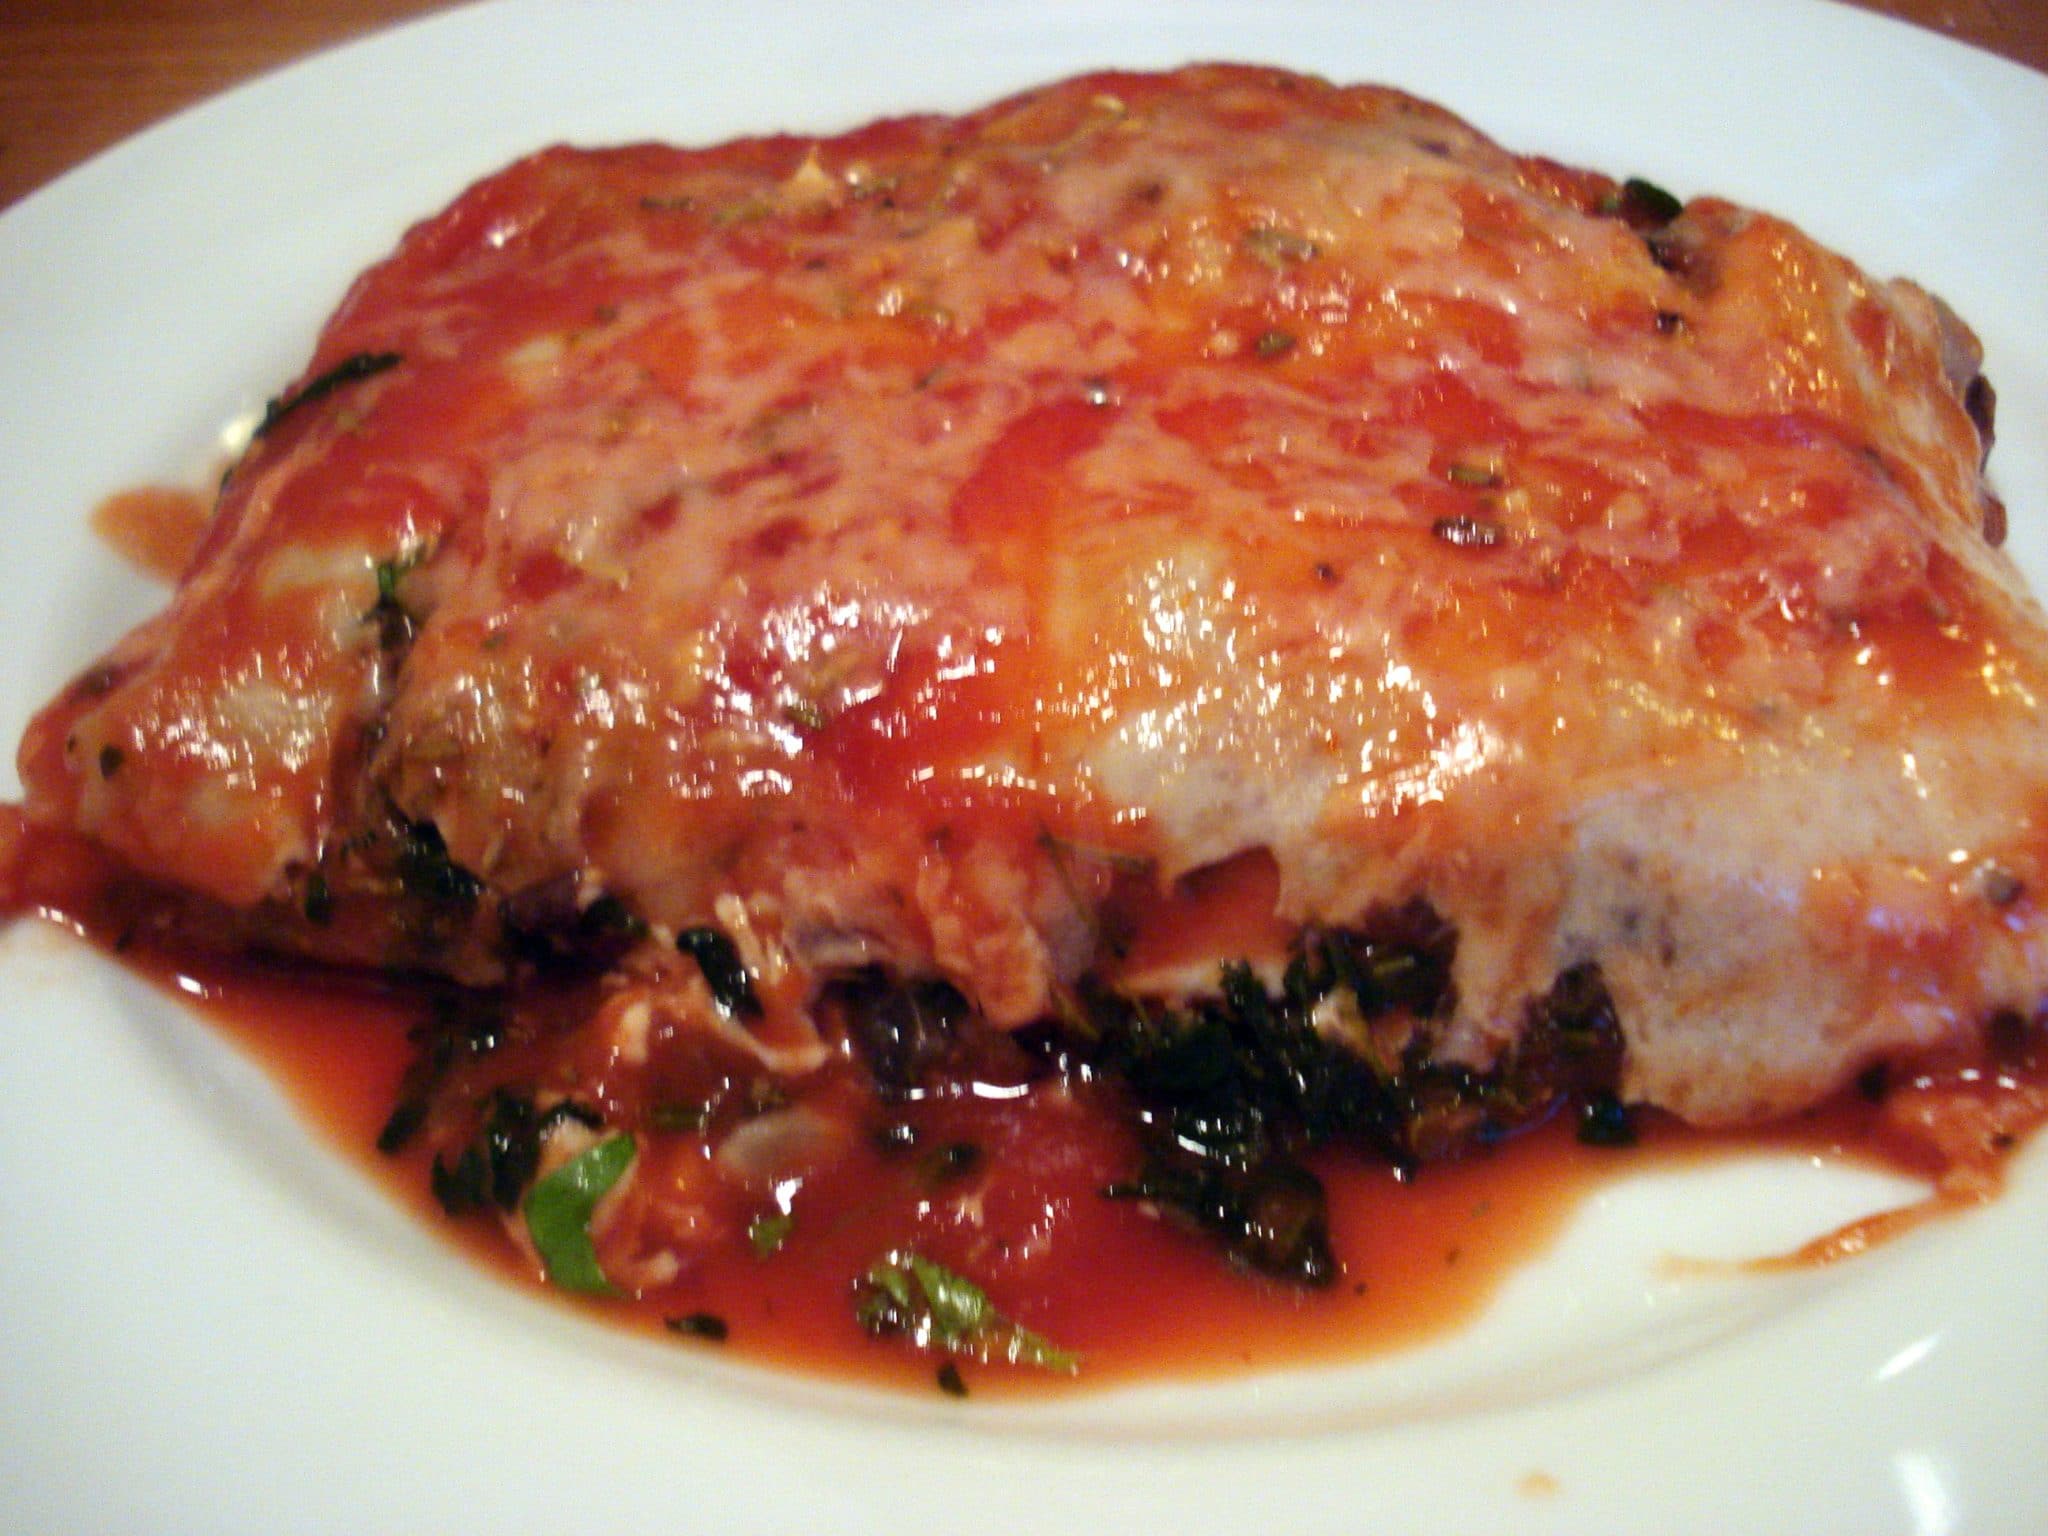 Plate of Spinach and Eggplant Lasagna